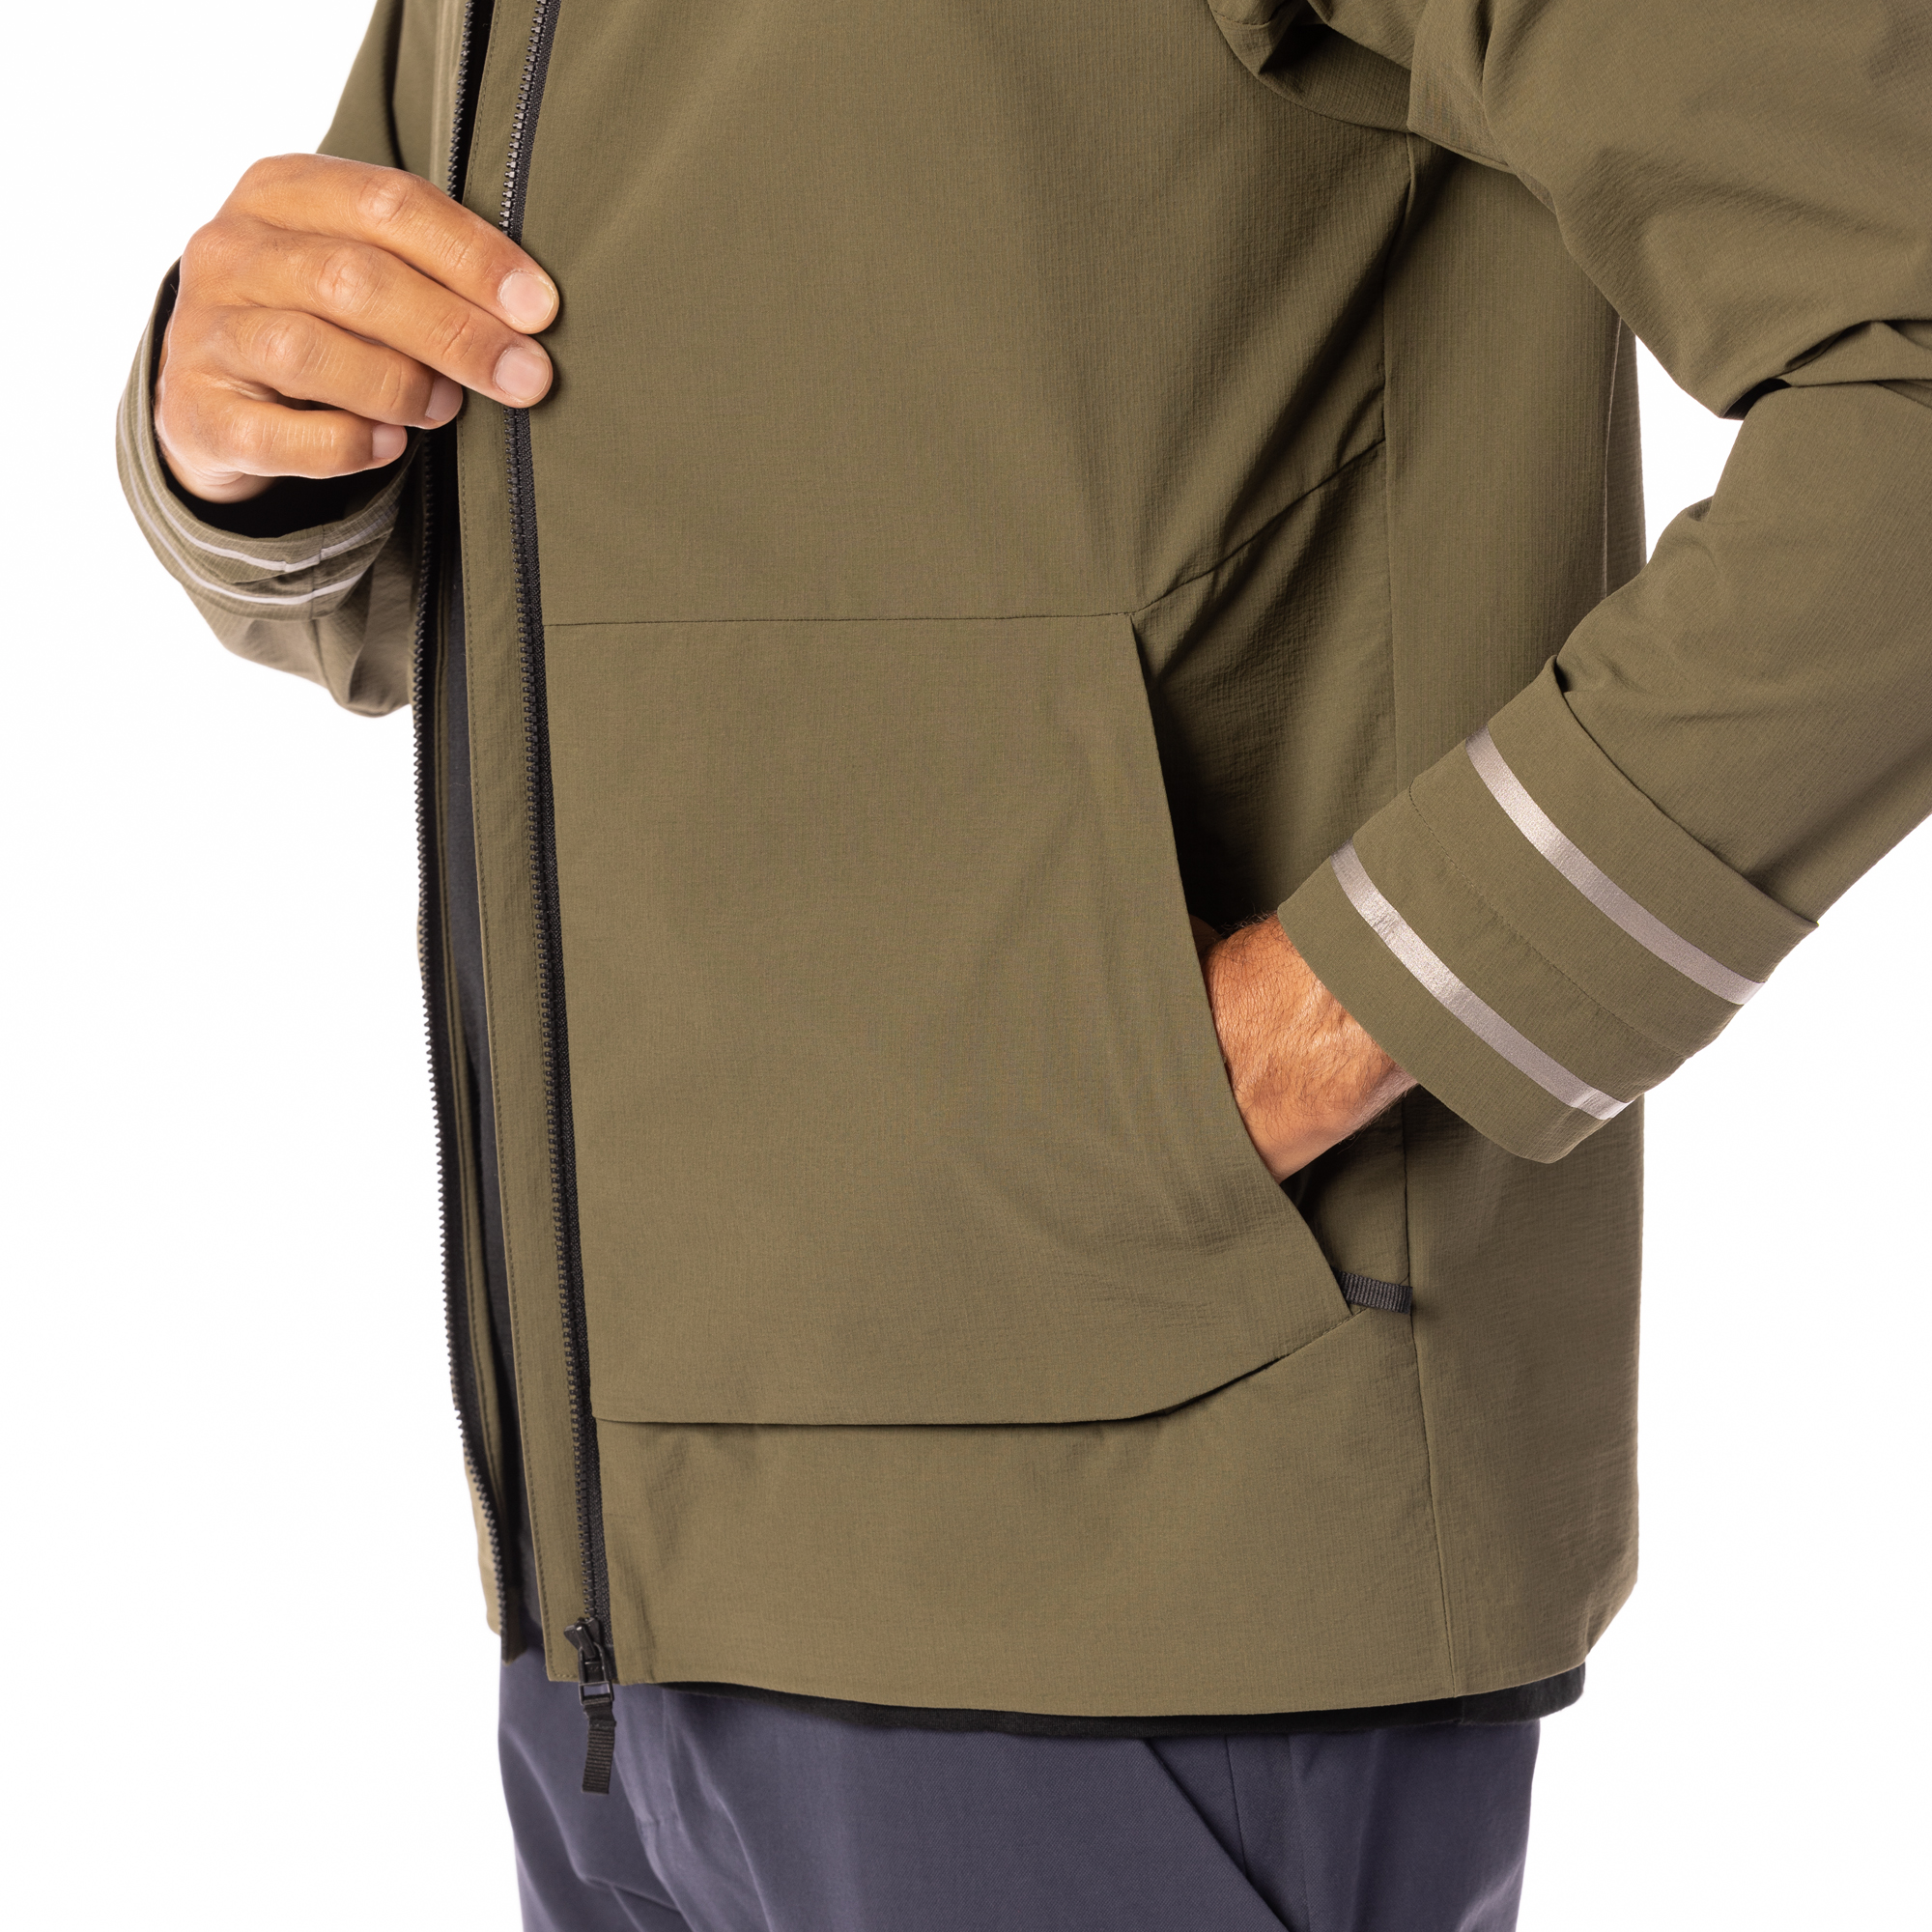 Cycling and Bike Jackets for Men